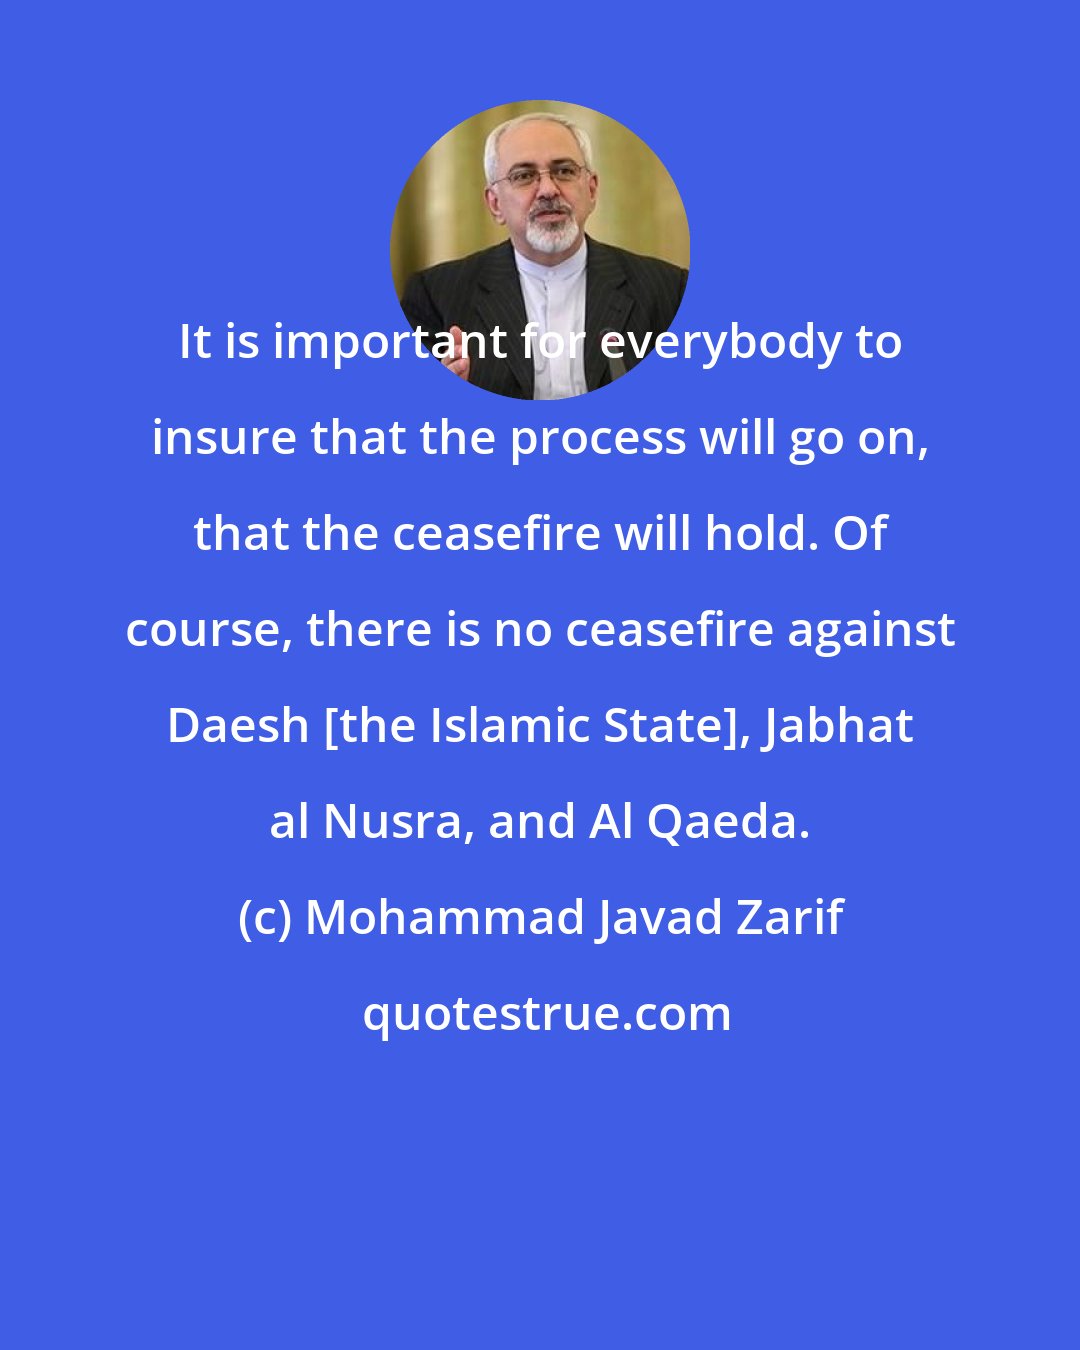 Mohammad Javad Zarif: It is important for everybody to insure that the process will go on, that the ceasefire will hold. Of course, there is no ceasefire against Daesh [the Islamic State], Jabhat al Nusra, and Al Qaeda.